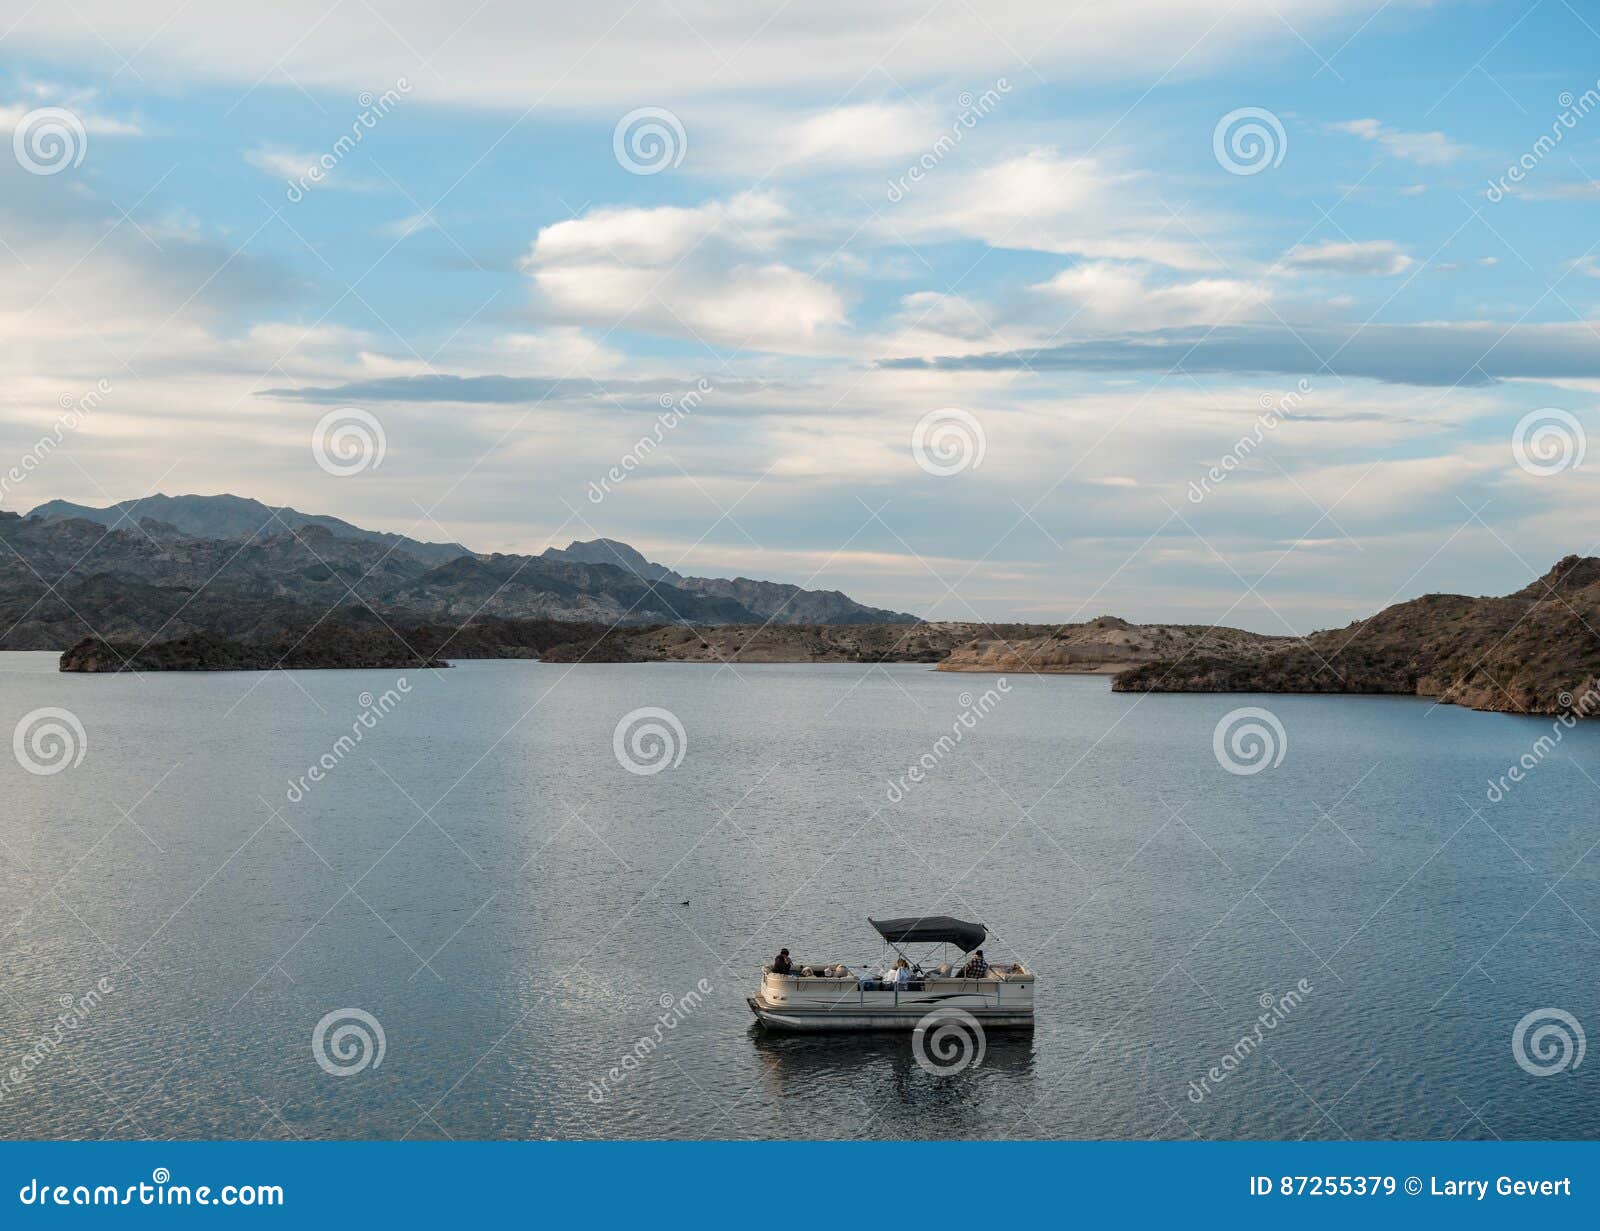 patio boat, lake mohave